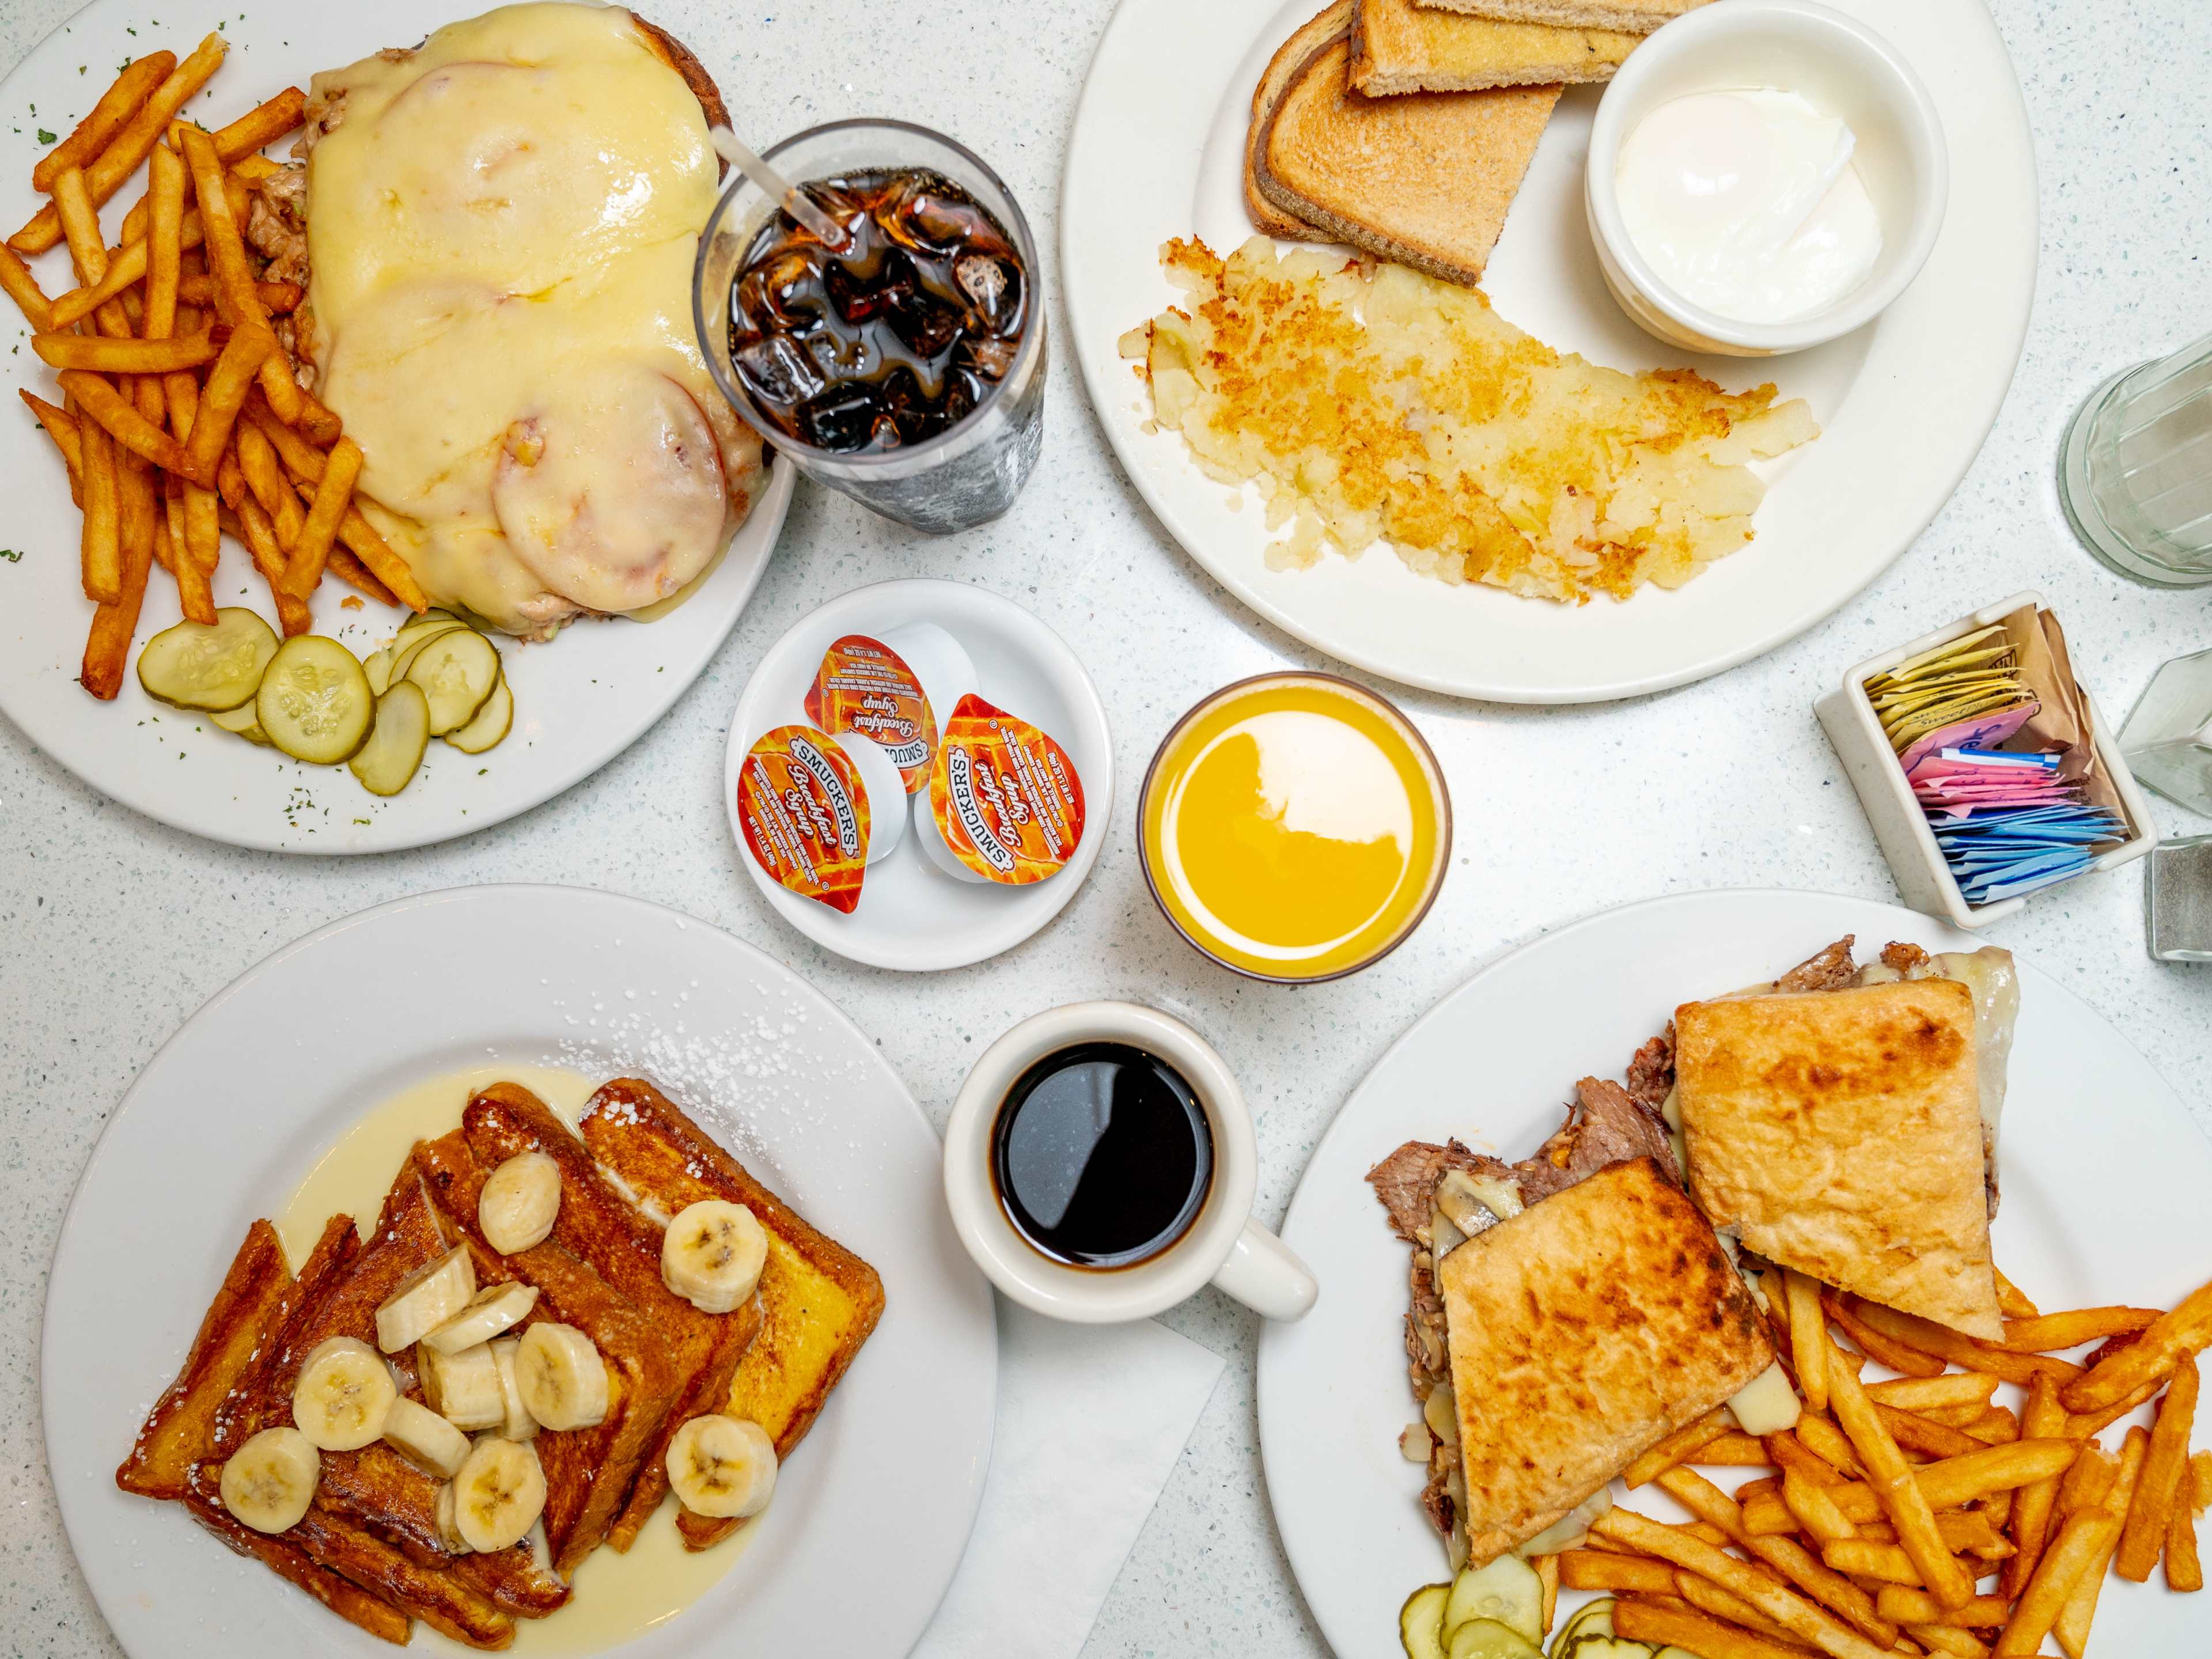 This is a food spread from Fishtown Diner.